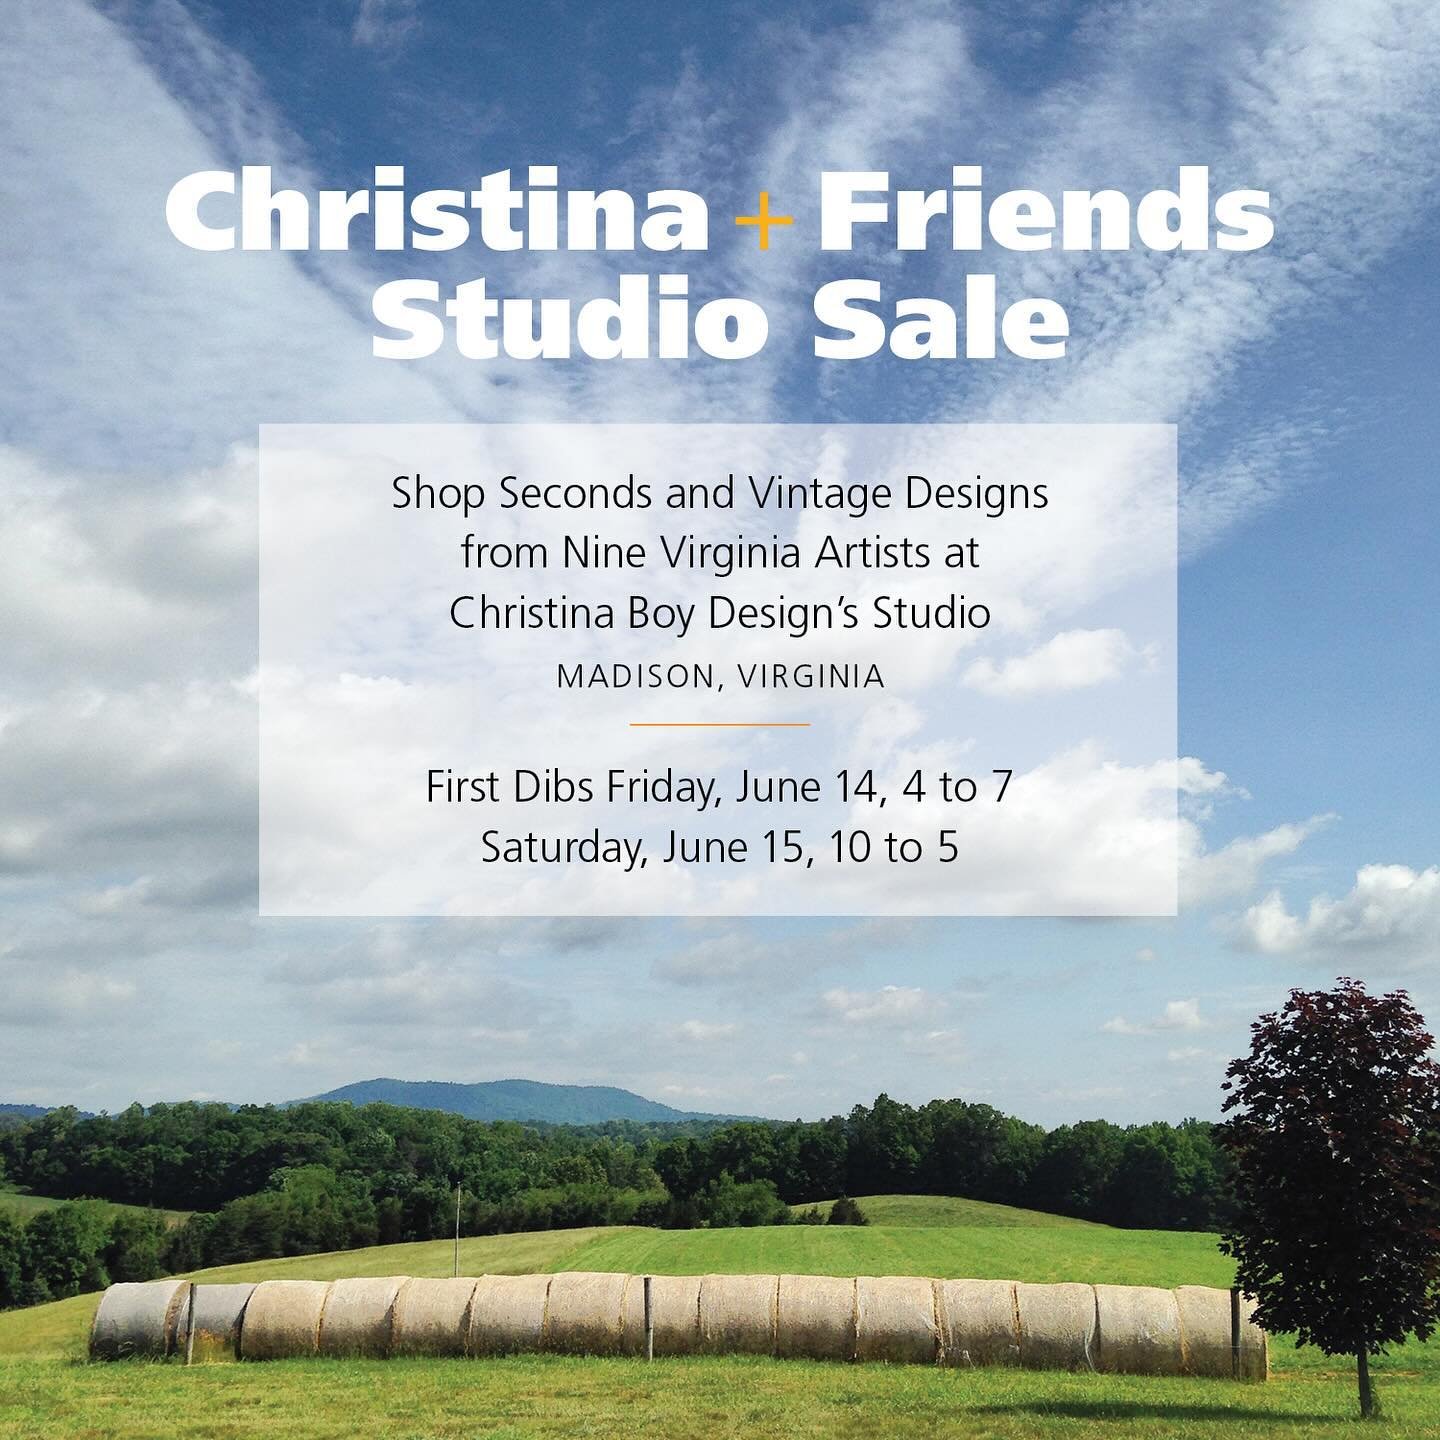 Save the Date!!

Shop vintage designs, prototypes, and stellar seconds at the Christina + Friends Studio Sale in Madison, VA. 

Get first dibs on Friday, June 14, 4-7pm; or shop all day Saturday, June 15, 10am-5pm

Hope to see you there!!